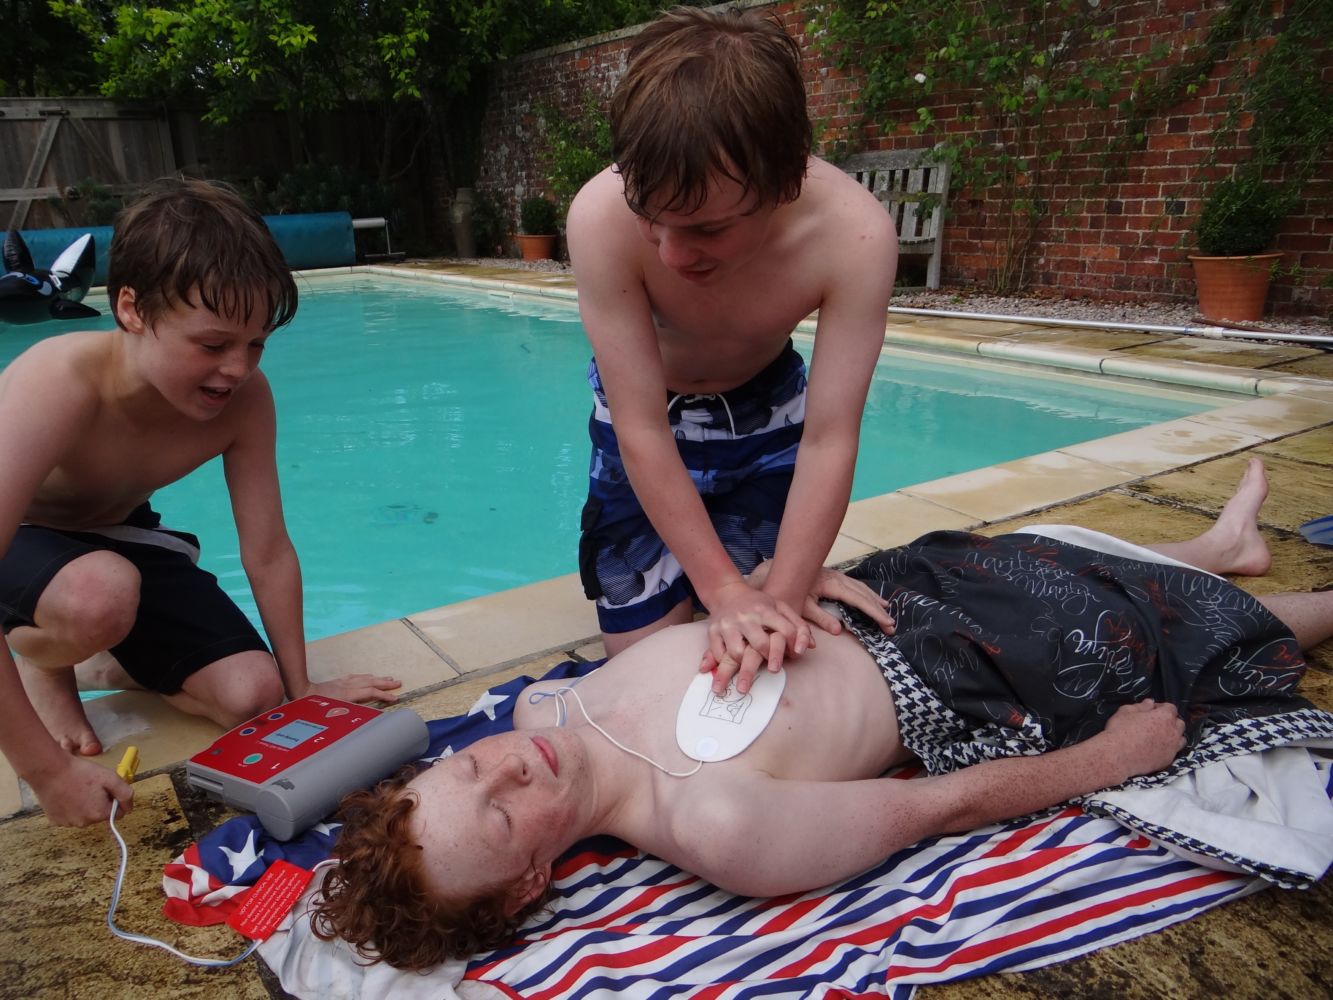 First Aid for a Drowning Adult, Baby or Child - First Aid for Life